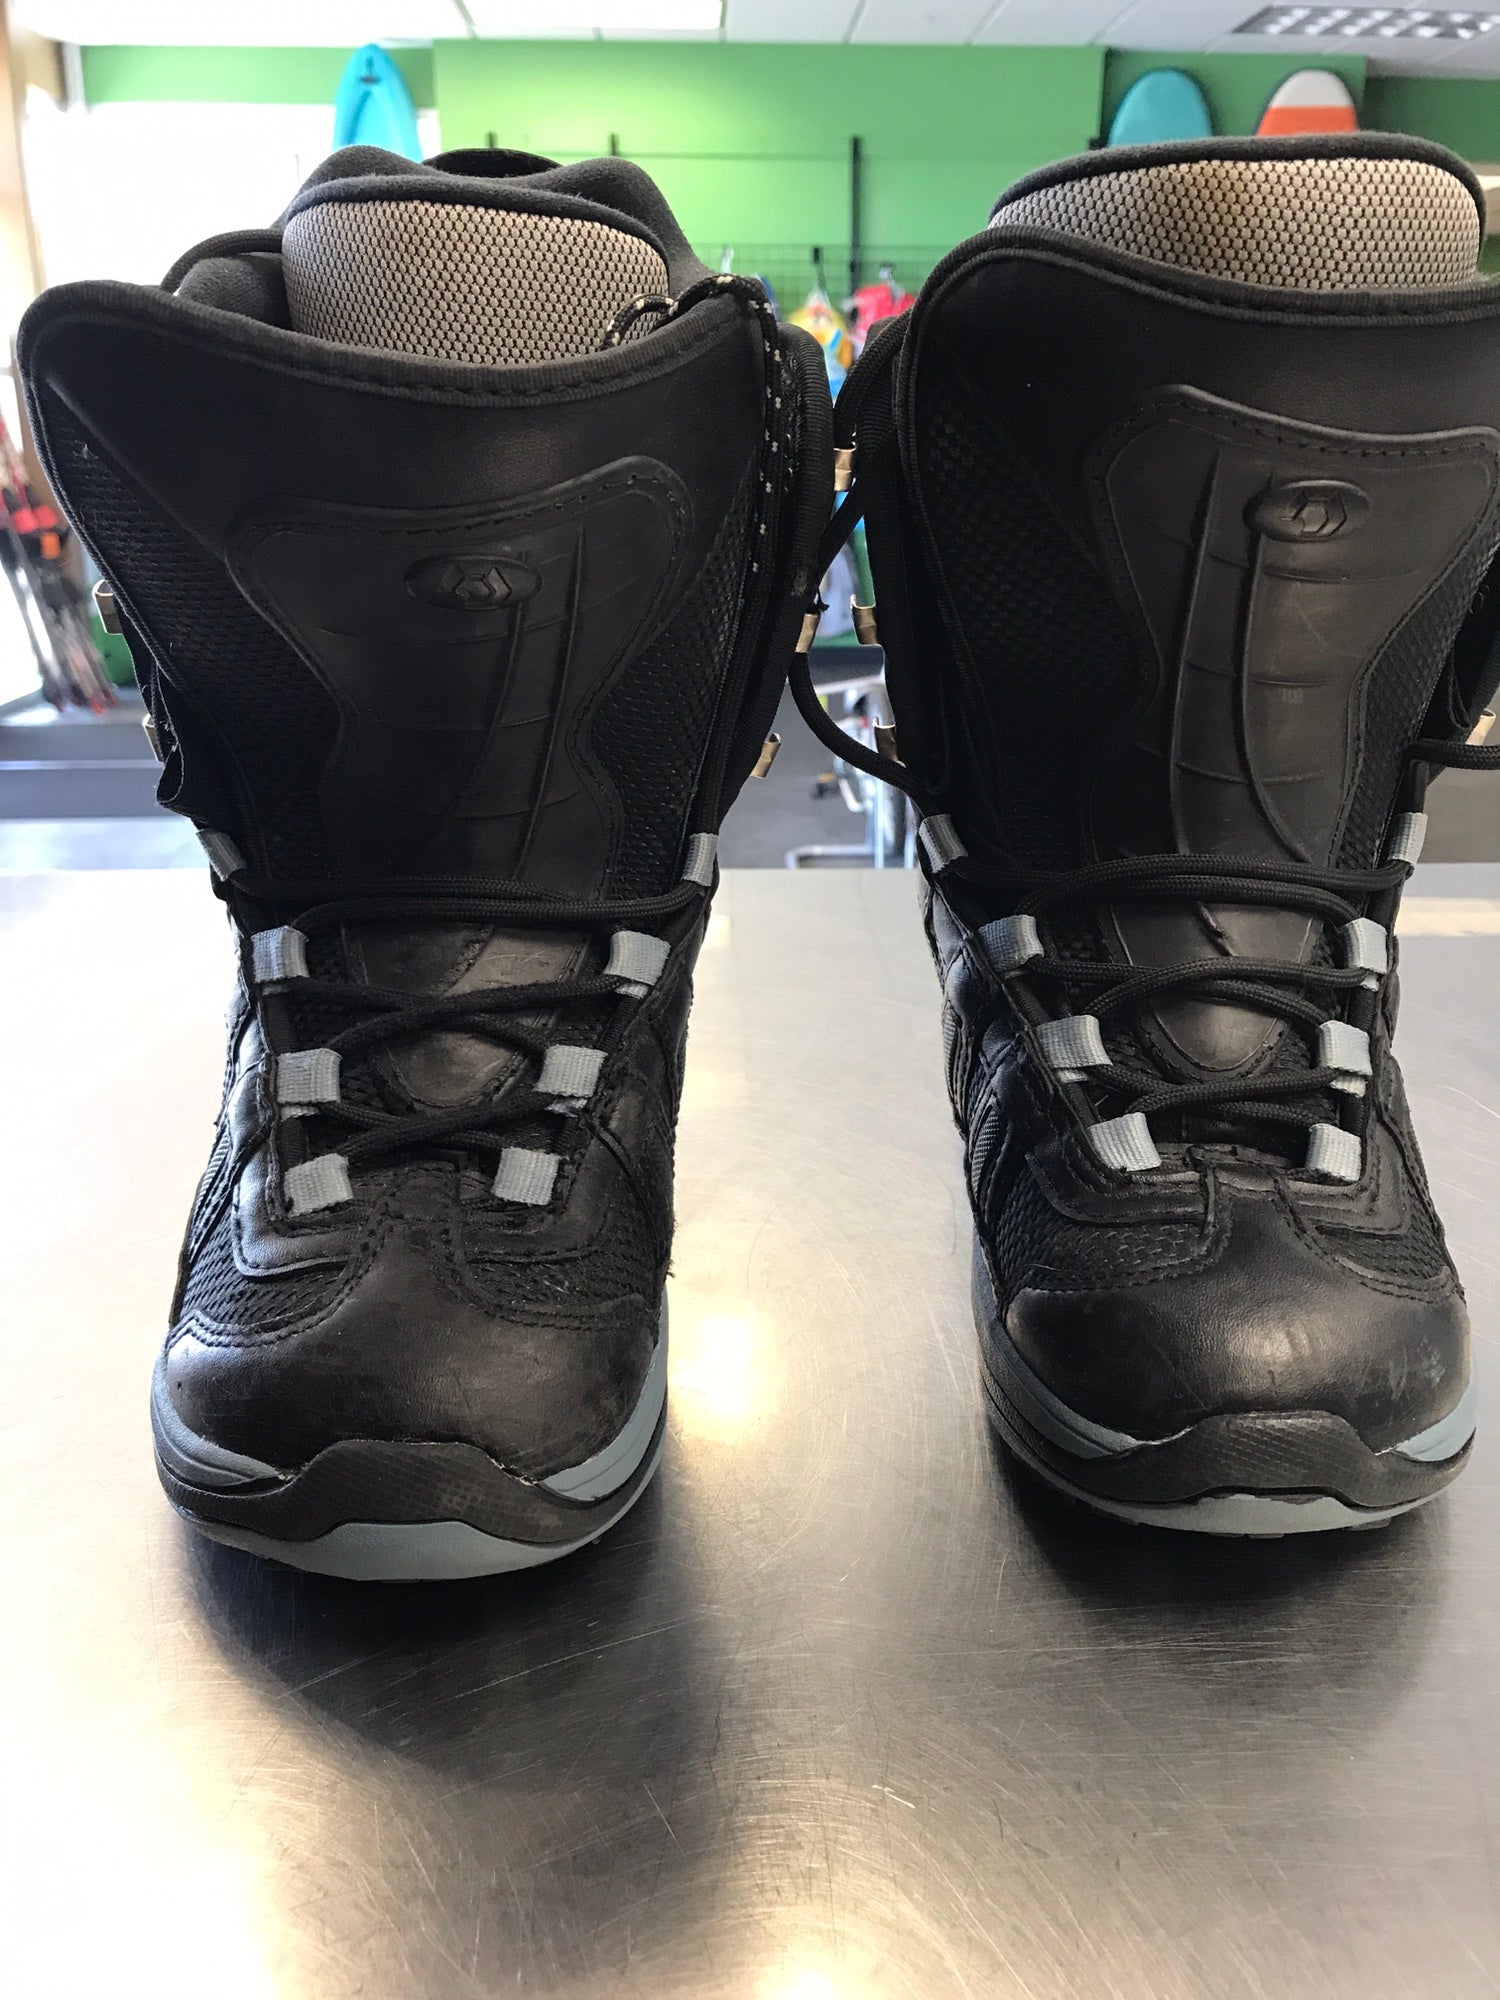 Details about   Northwave Women's/ Children’s Snowboard Boots Size 5 Used 